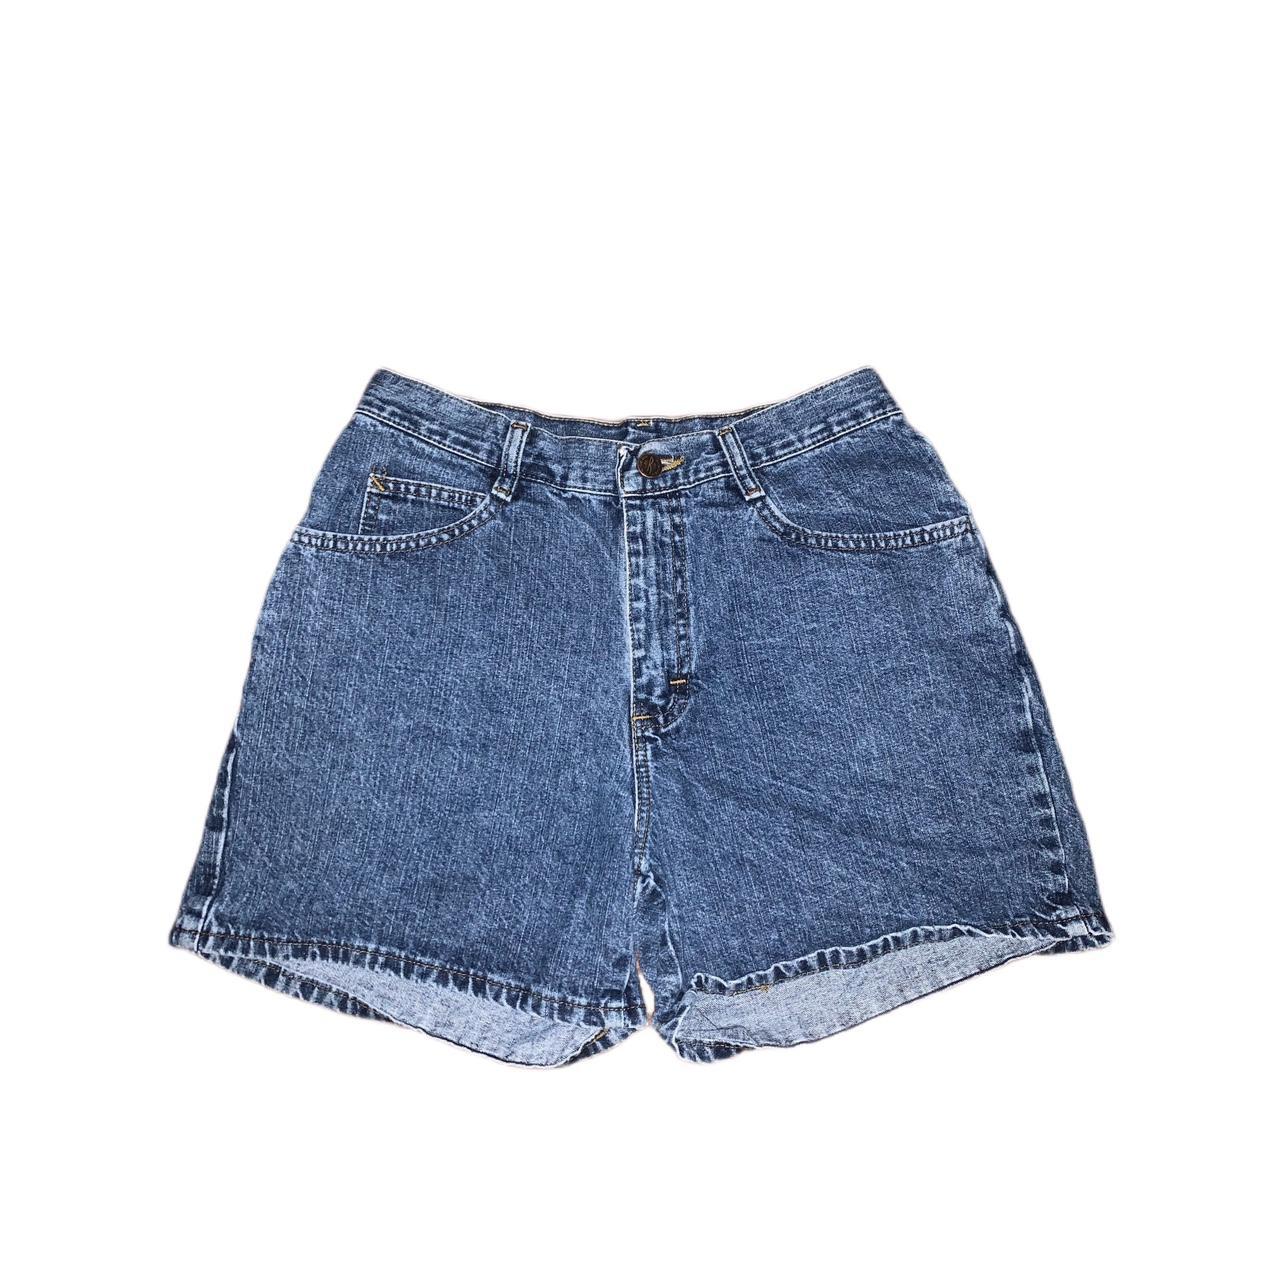 Blue high waisted jean shorts. Riders by Lee.... - Depop